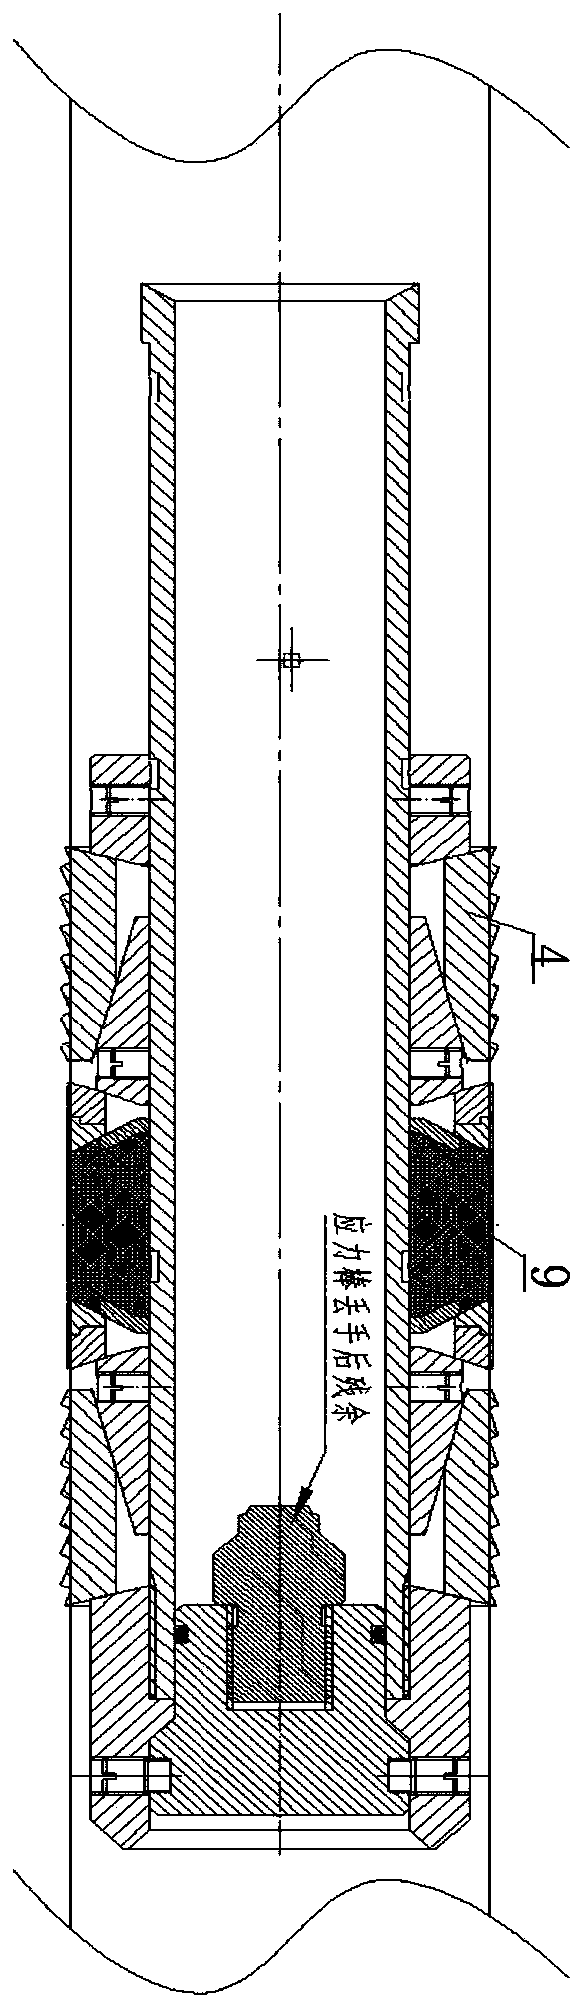 Large-drift-diameter treatment-free downhole high-pressure temporary plugging tool and method